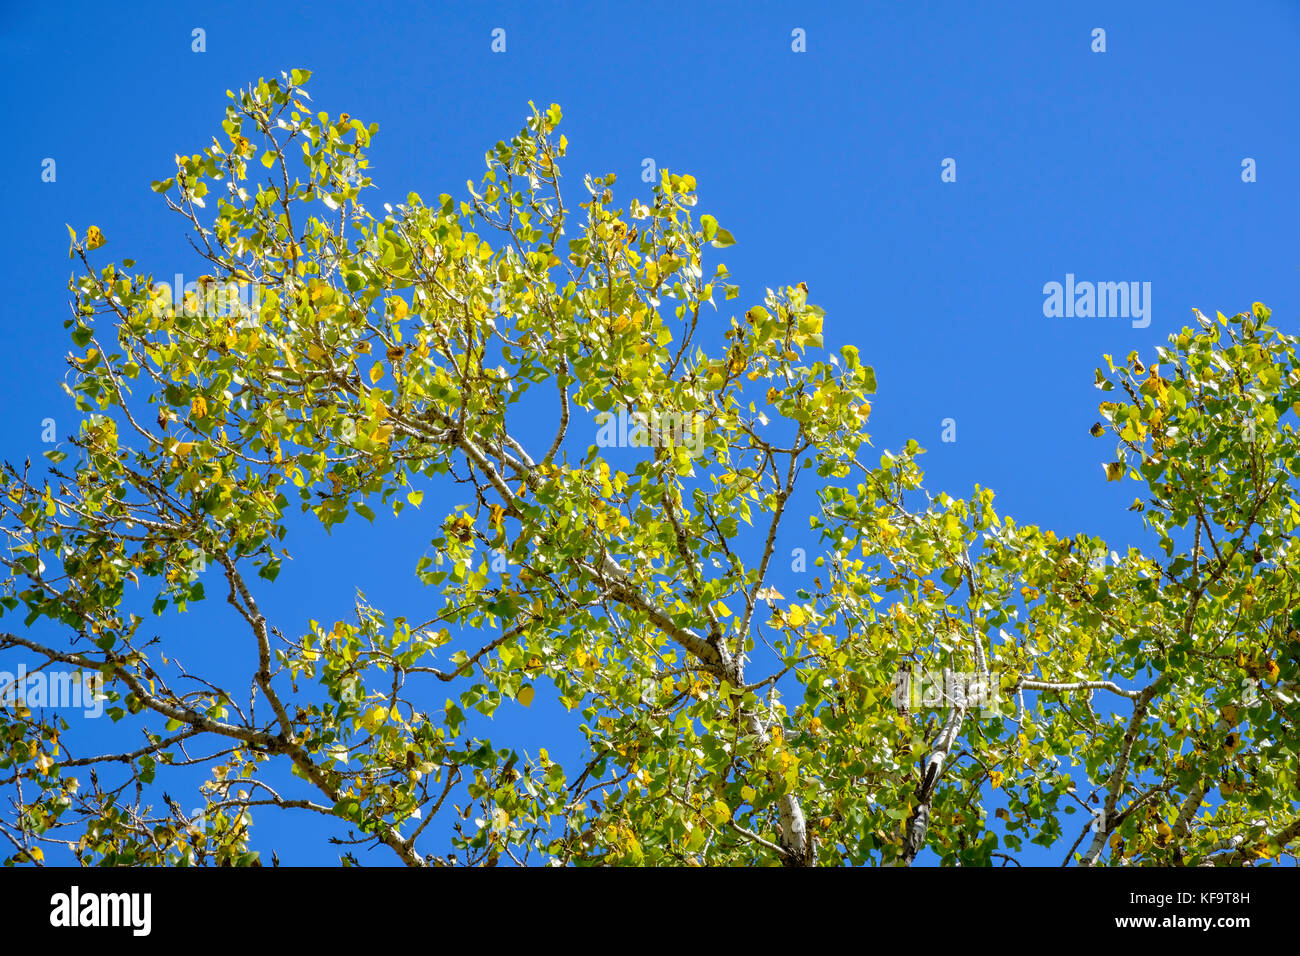 The top of a Large mature Eastern Cottonwood tree early autumn against a blue sky. Oklahoma, USA. Stock Photo